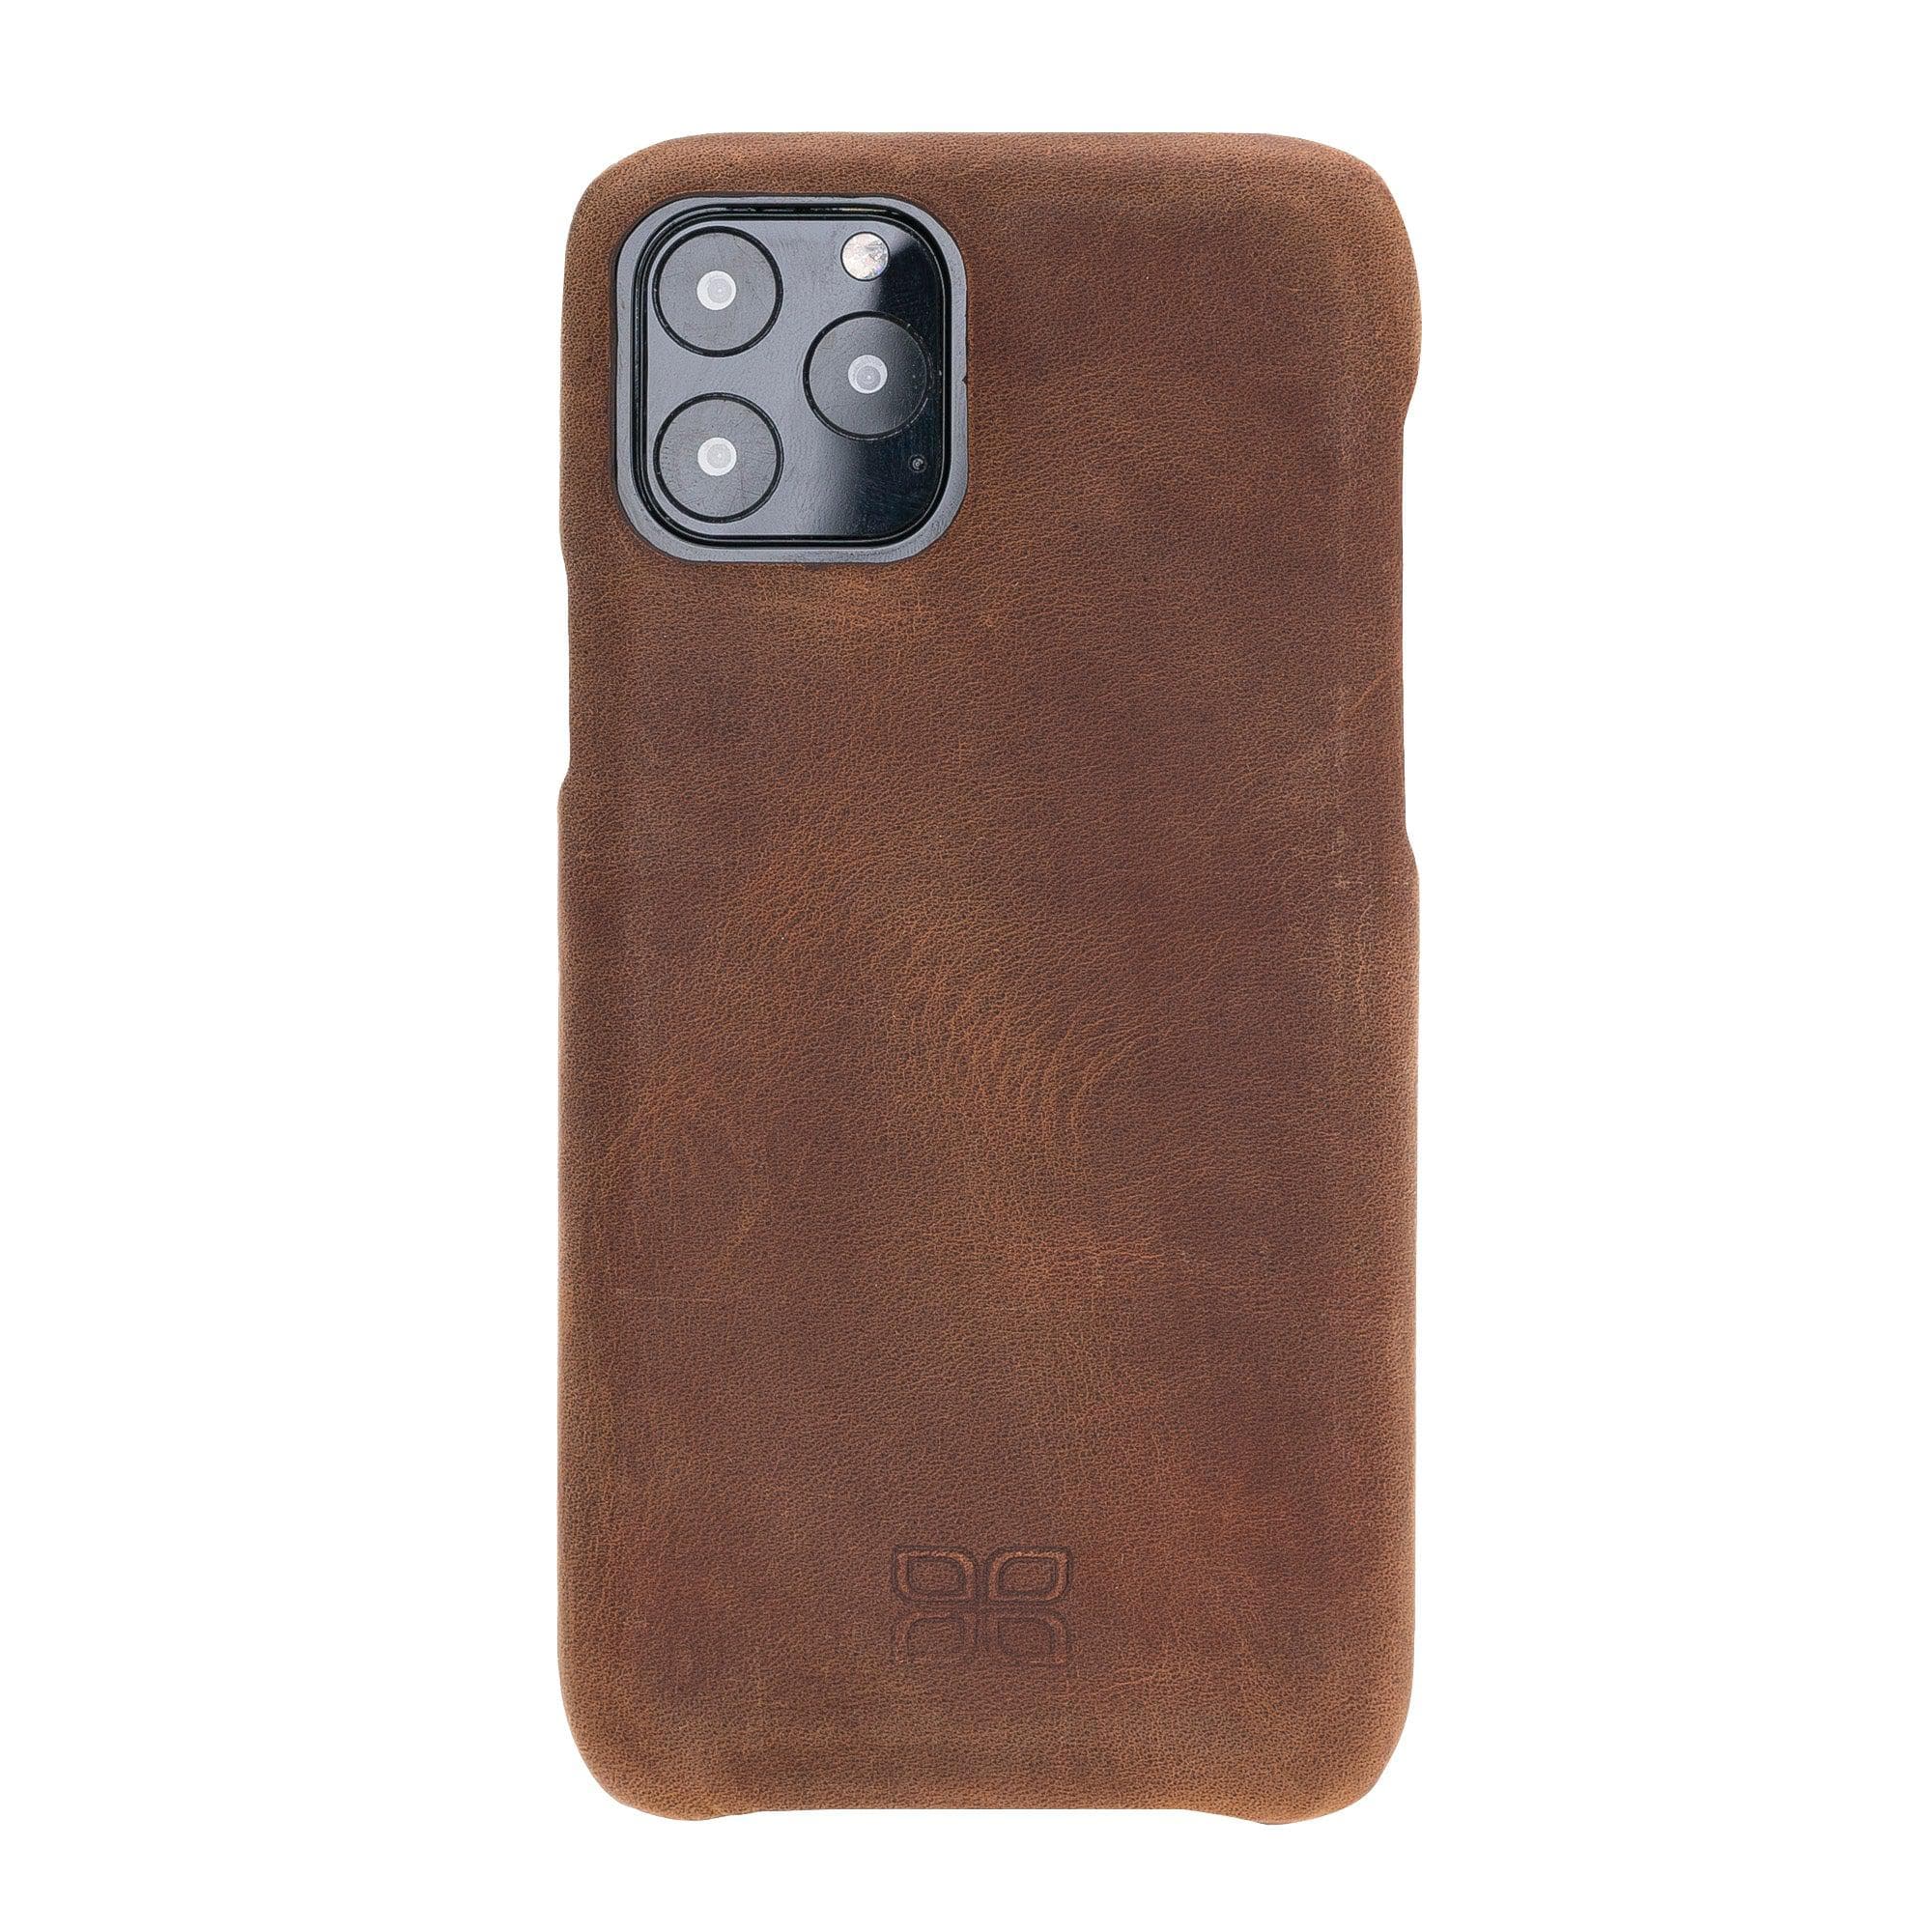 Bouletta Fully Leather Back Cover for Apple iPhone 11 Series iPhone 11 Pro / Antic Brown Bouletta LTD